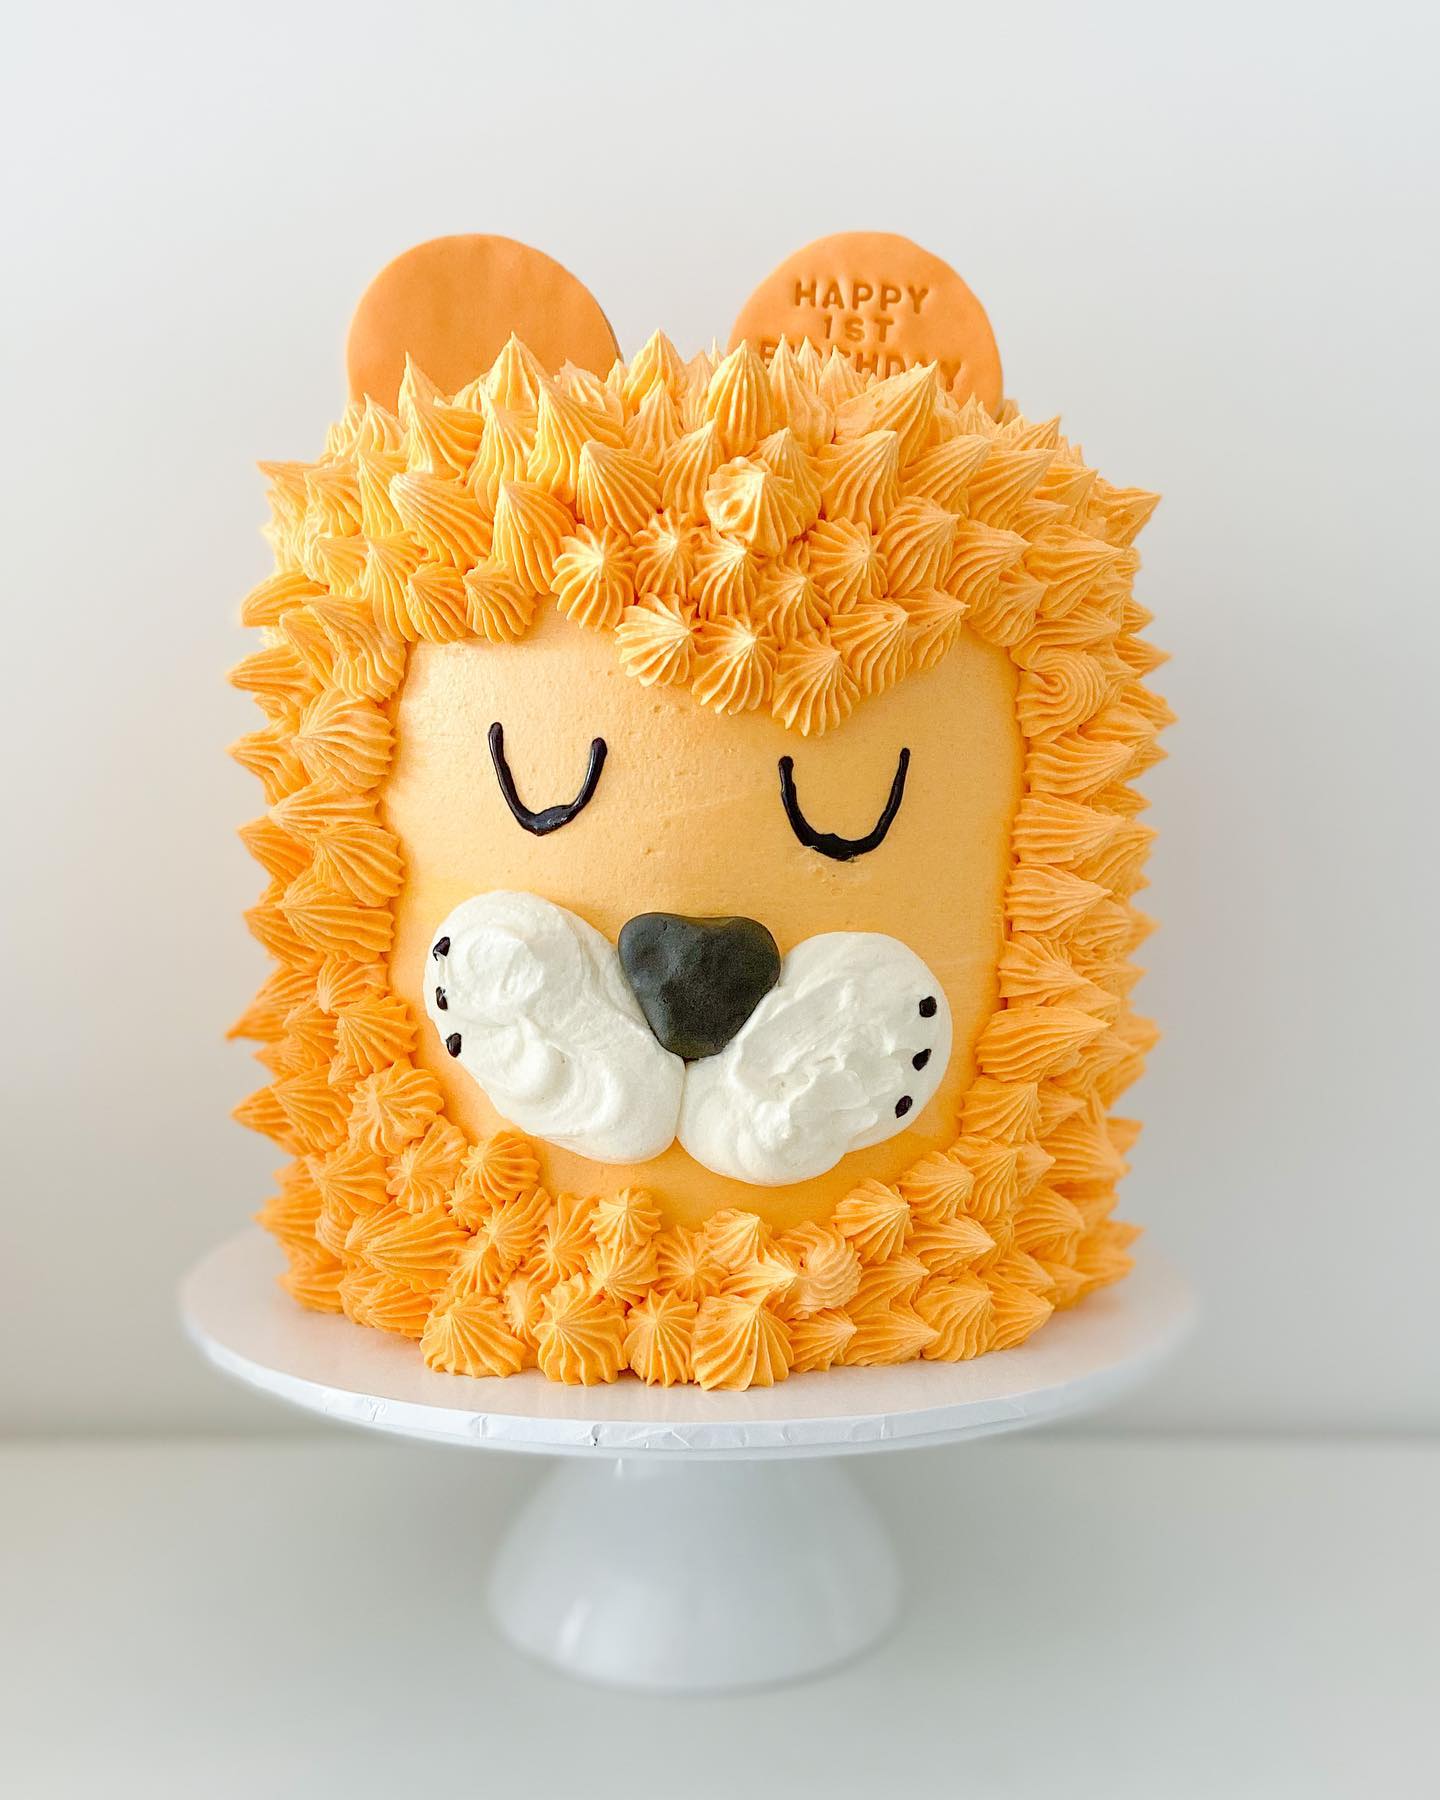 My attempt at a lion birthday cake as requested by my 5yo nephew. :  r/cakedecorating